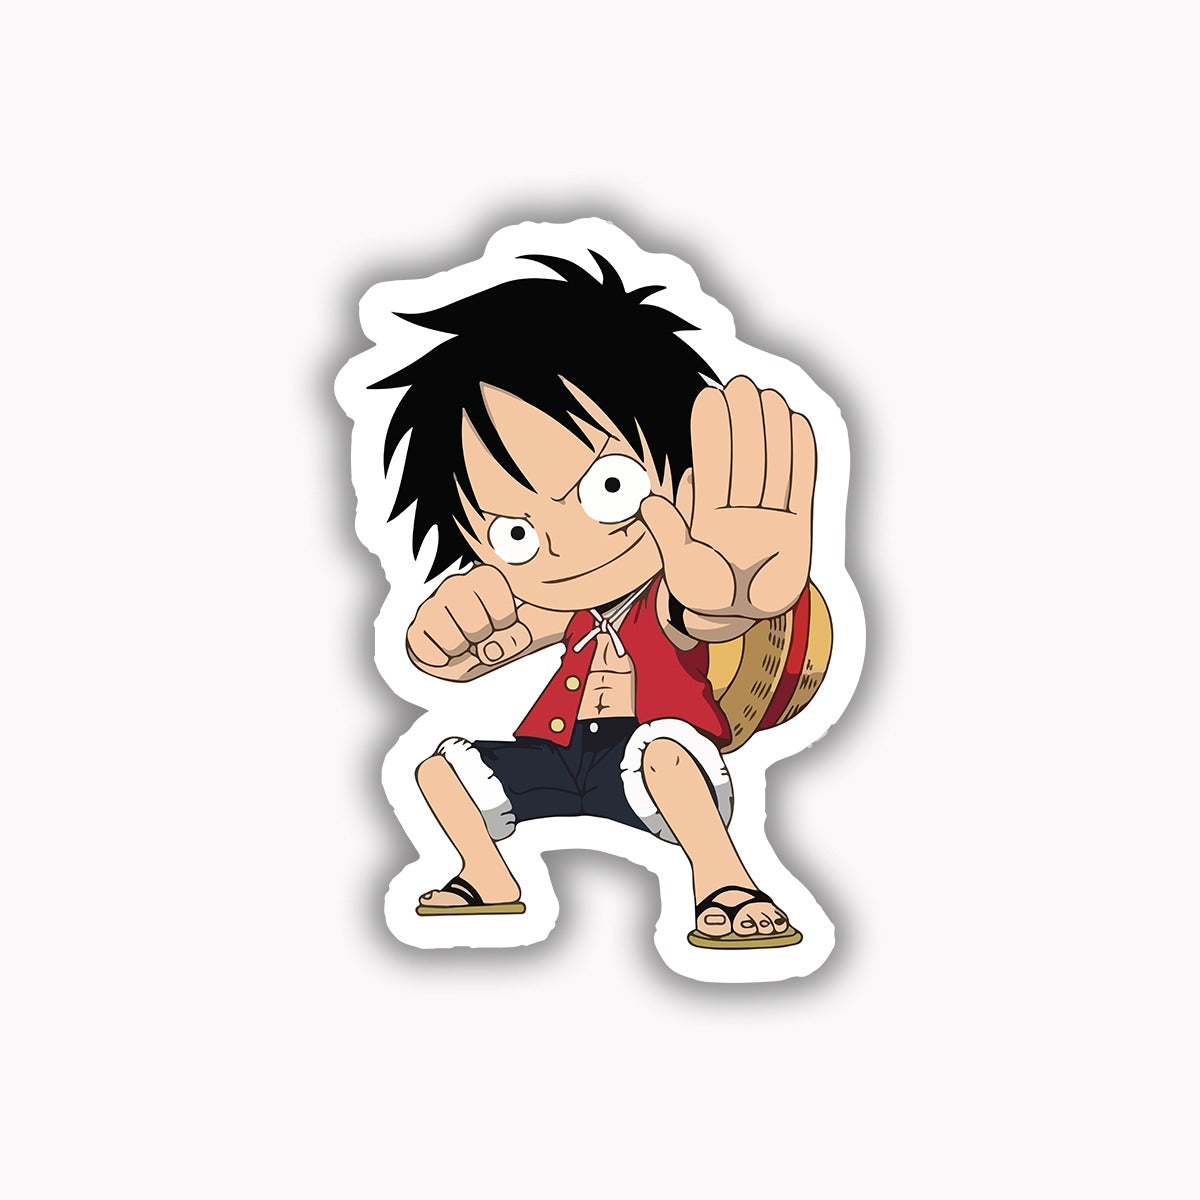 Luffy trying to say stop